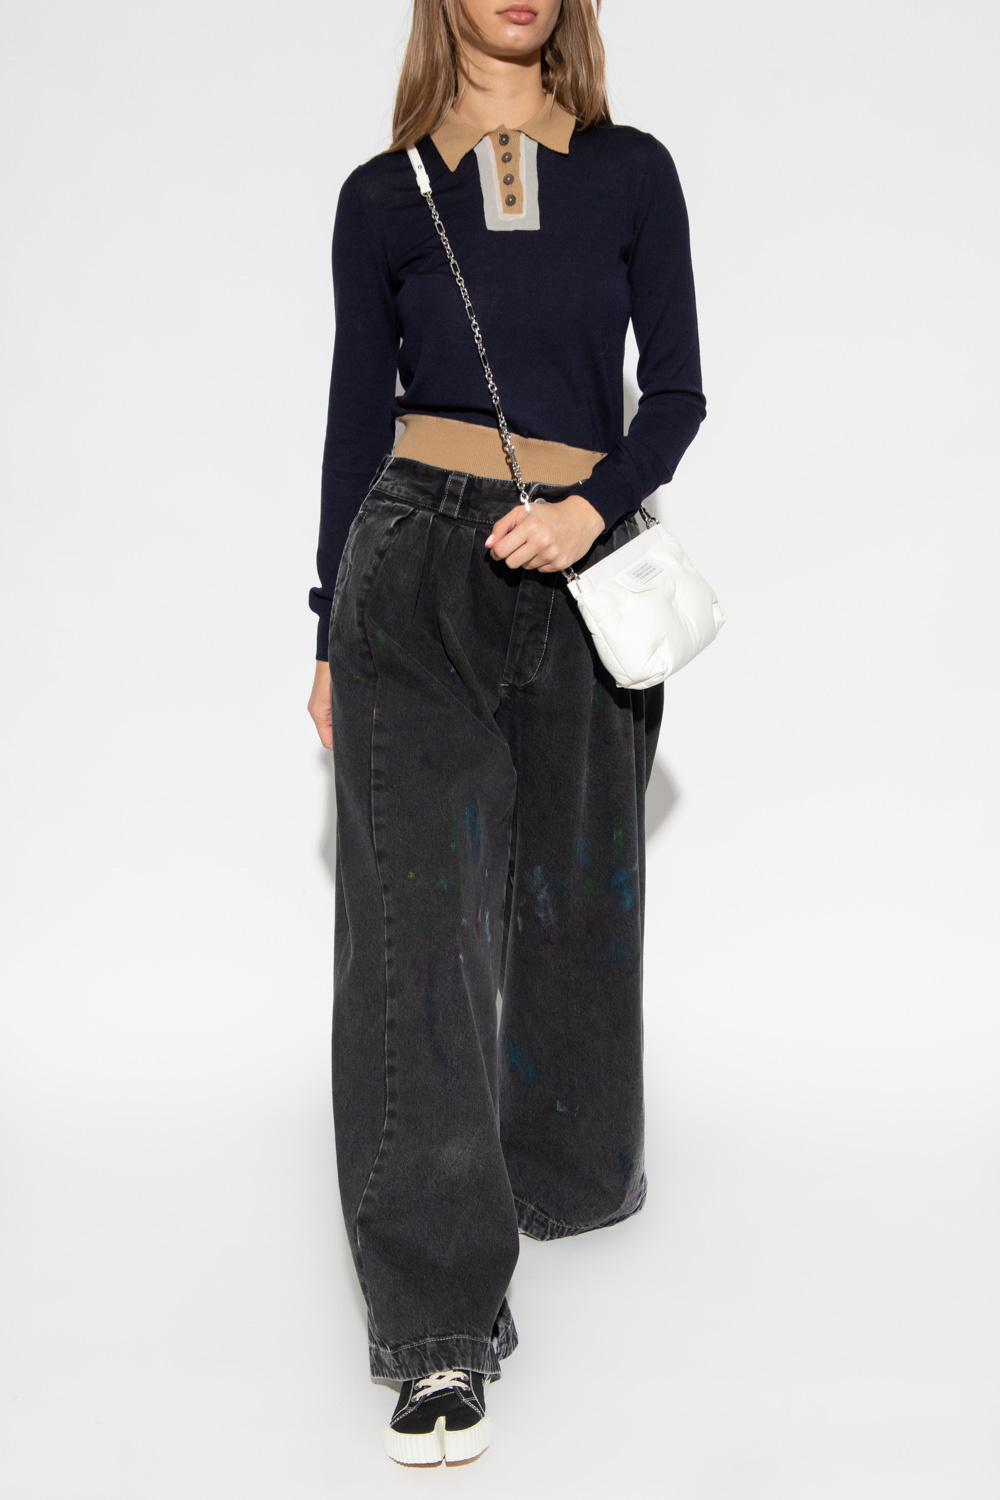 Maison Margiela Relaxed-fitting jeans